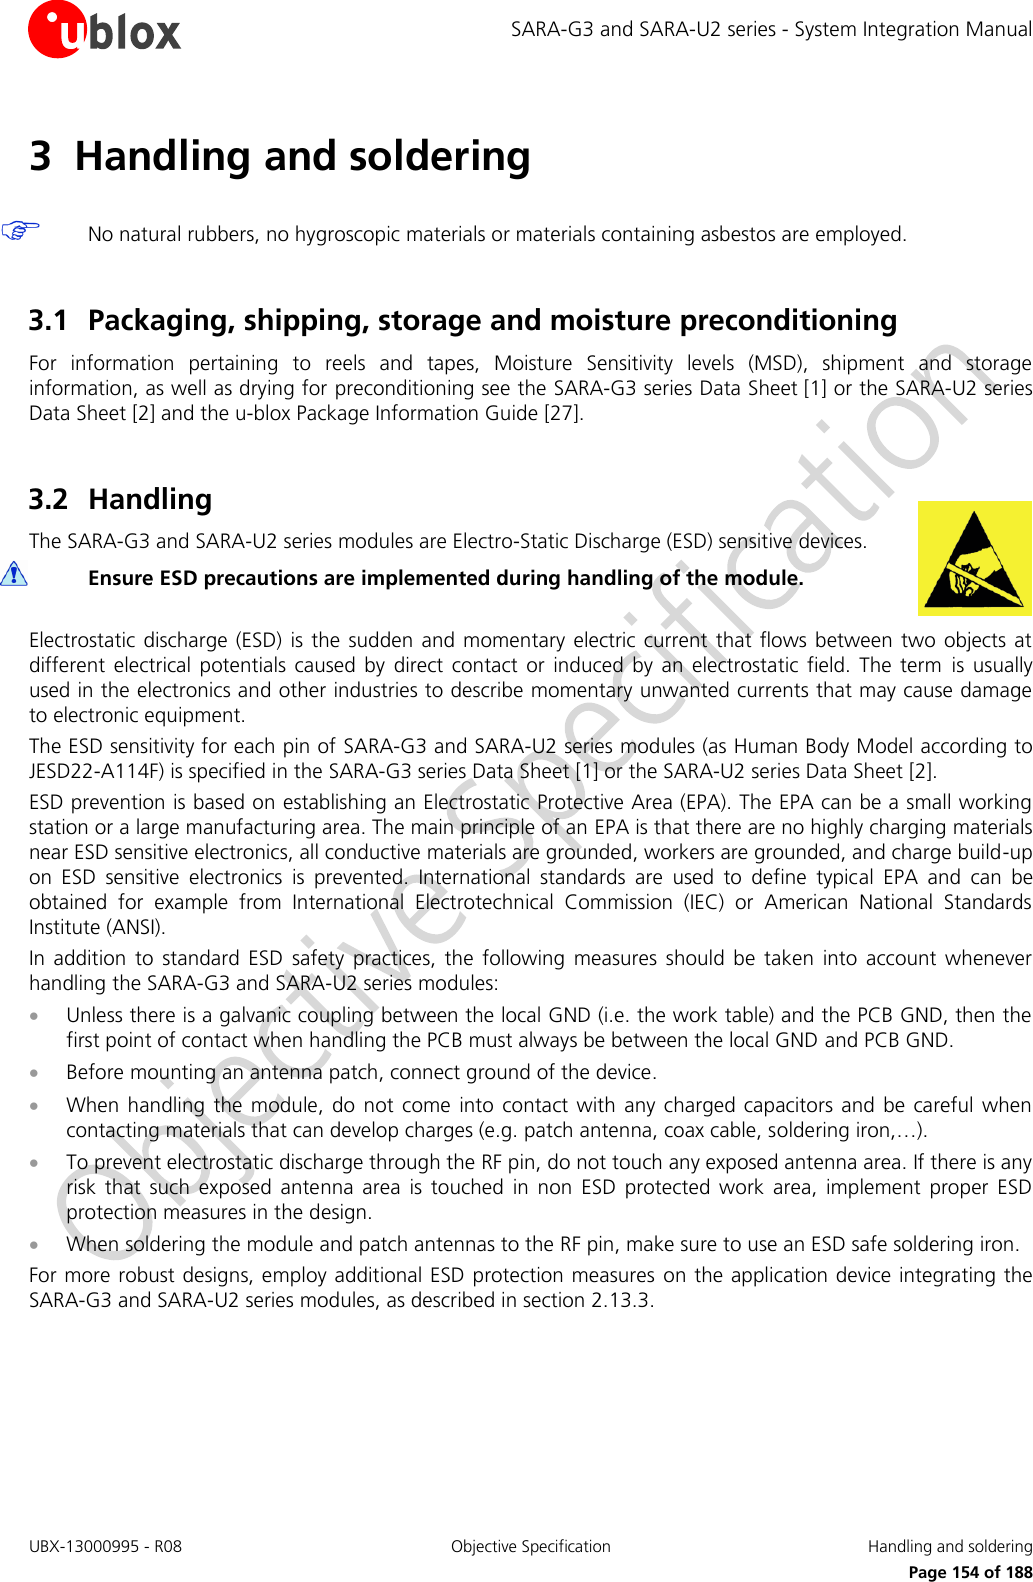 SARA-G3 and SARA-U2 series - System Integration Manual UBX-13000995 - R08  Objective Specification  Handling and soldering     Page 154 of 188 3 Handling and soldering   No natural rubbers, no hygroscopic materials or materials containing asbestos are employed.  3.1 Packaging, shipping, storage and moisture preconditioning For  information  pertaining  to  reels  and  tapes,  Moisture  Sensitivity  levels  (MSD),  shipment  and  storage information, as well as drying for preconditioning see the SARA-G3 series Data Sheet [1] or the SARA-U2 series Data Sheet [2] and the u-blox Package Information Guide [27].  3.2 Handling The SARA-G3 and SARA-U2 series modules are Electro-Static Discharge (ESD) sensitive devices.  Ensure ESD precautions are implemented during handling of the module.  Electrostatic  discharge (ESD)  is  the  sudden and  momentary electric  current  that flows  between  two objects  at different  electrical  potentials  caused  by  direct  contact  or  induced  by  an  electrostatic  field. The  term  is  usually used in the electronics and other industries to describe momentary unwanted currents that may cause damage to electronic equipment. The ESD sensitivity for each pin of SARA-G3 and SARA-U2 series modules (as Human Body Model according to JESD22-A114F) is specified in the SARA-G3 series Data Sheet [1] or the SARA-U2 series Data Sheet [2]. ESD prevention is based on establishing an Electrostatic Protective Area (EPA). The EPA can be a small working station or a large manufacturing area. The main principle of an EPA is that there are no highly charging materials near ESD sensitive electronics, all conductive materials are grounded, workers are grounded, and charge build-up on  ESD  sensitive  electronics  is  prevented.  International  standards  are  used  to  define  typical  EPA  and  can  be obtained  for  example  from  International  Electrotechnical  Commission  (IEC)  or  American  National  Standards Institute (ANSI). In  addition  to  standard  ESD  safety  practices,  the  following  measures  should  be  taken  into  account  whenever handling the SARA-G3 and SARA-U2 series modules:  Unless there is a galvanic coupling between the local GND (i.e. the work table) and the PCB GND, then the first point of contact when handling the PCB must always be between the local GND and PCB GND.  Before mounting an antenna patch, connect ground of the device.  When  handling  the module,  do not come  into  contact  with  any charged  capacitors  and be careful  when contacting materials that can develop charges (e.g. patch antenna, coax cable, soldering iron,…).  To prevent electrostatic discharge through the RF pin, do not touch any exposed antenna area. If there is any risk  that  such  exposed  antenna  area  is  touched  in  non  ESD  protected  work  area,  implement  proper  ESD protection measures in the design.  When soldering the module and patch antennas to the RF pin, make sure to use an ESD safe soldering iron. For more robust designs, employ additional ESD protection measures  on the application device integrating the SARA-G3 and SARA-U2 series modules, as described in section 2.13.3.  